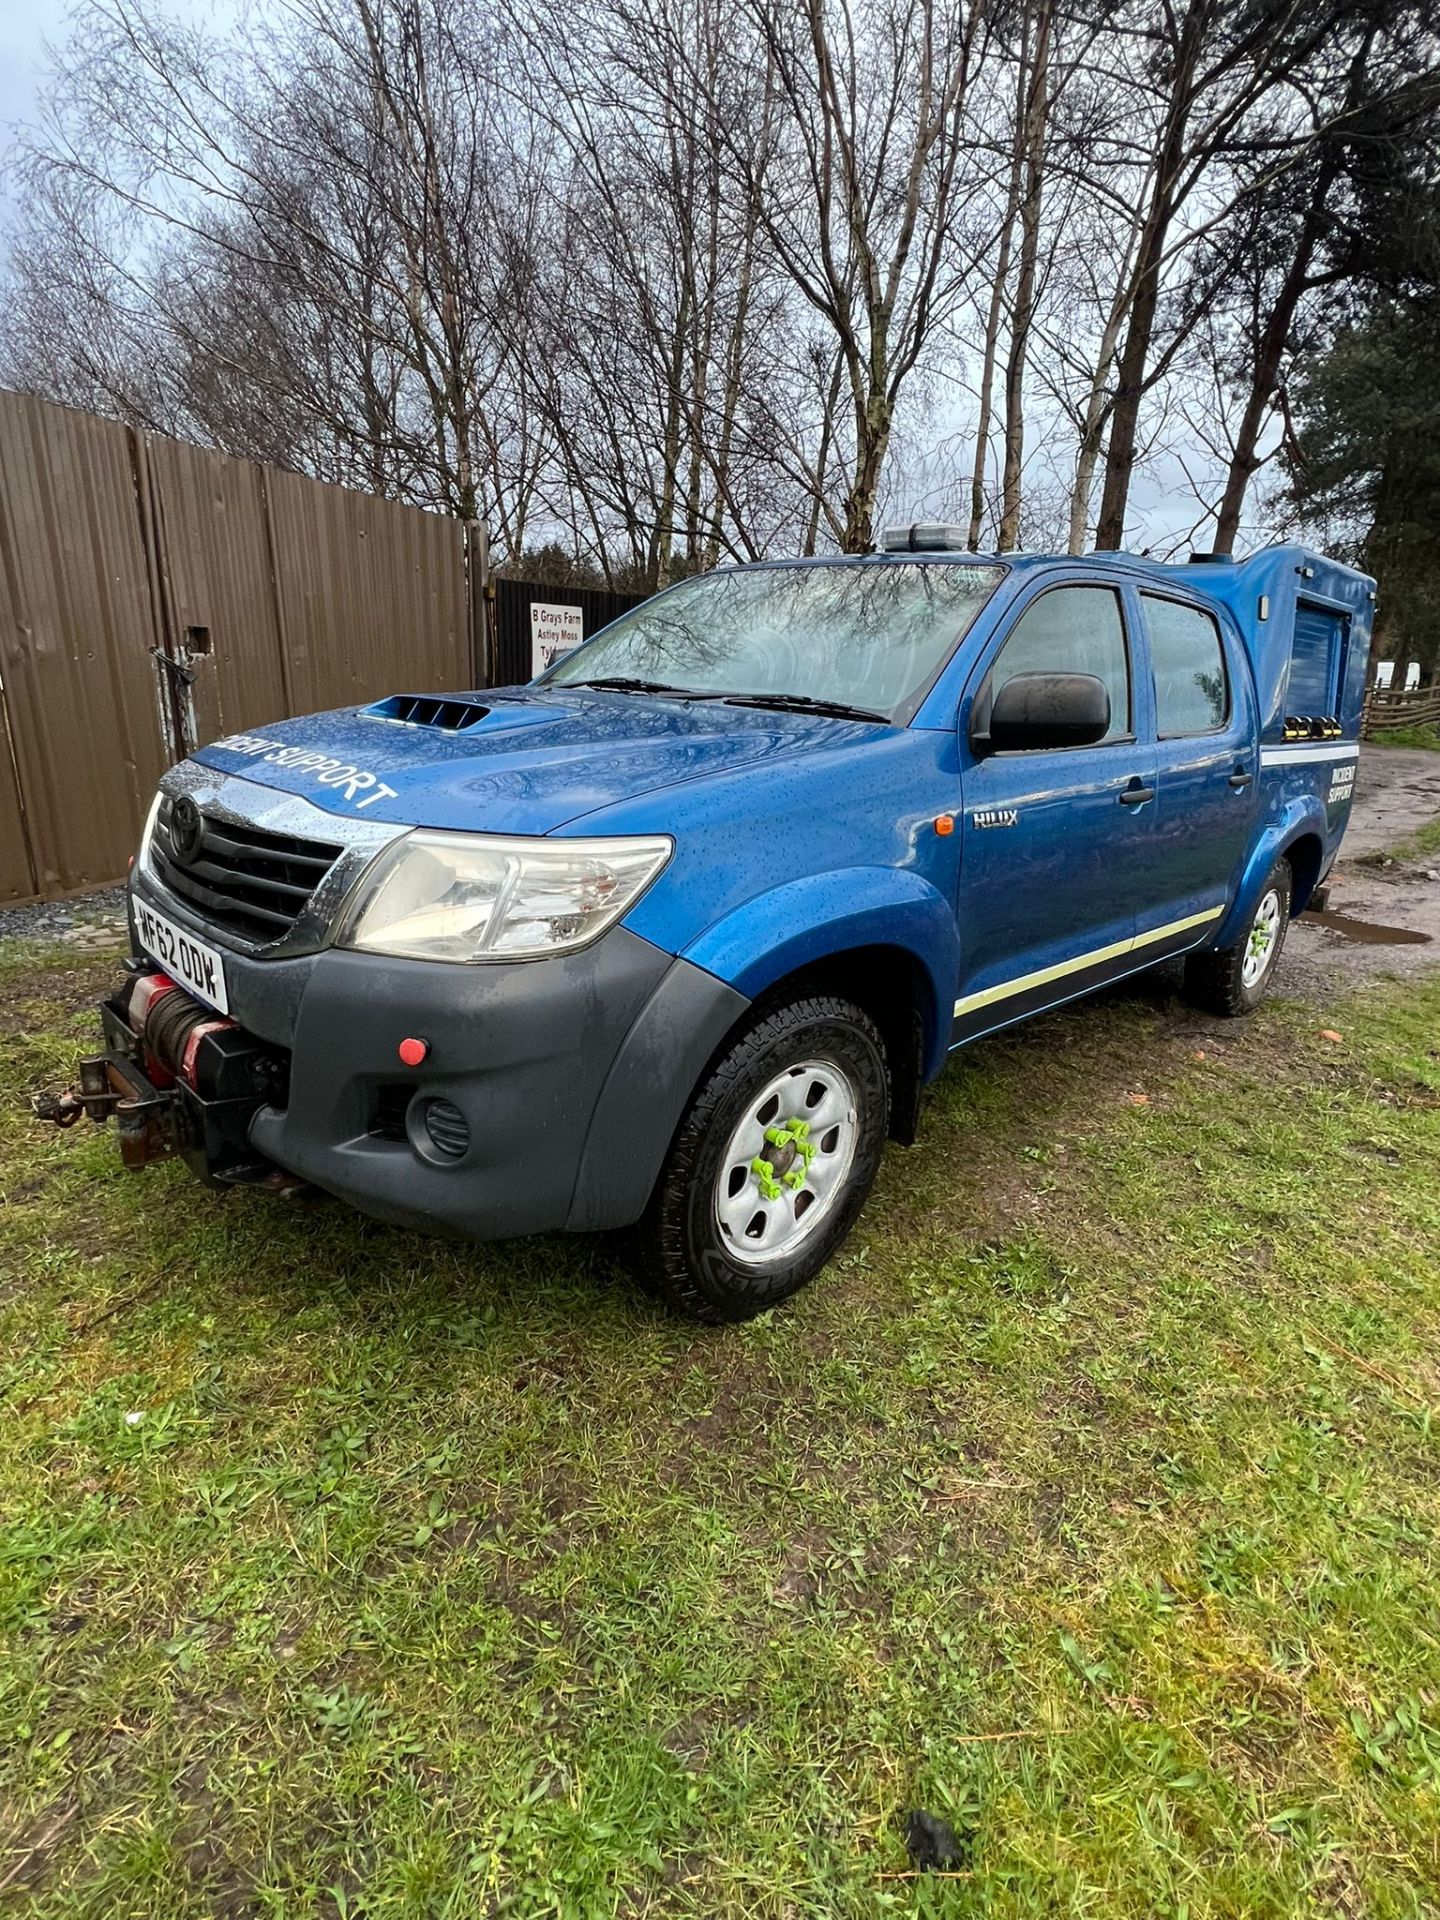 TOYOTA HILUX 91K MILES READY TO DRIVE AWAY - Image 7 of 13